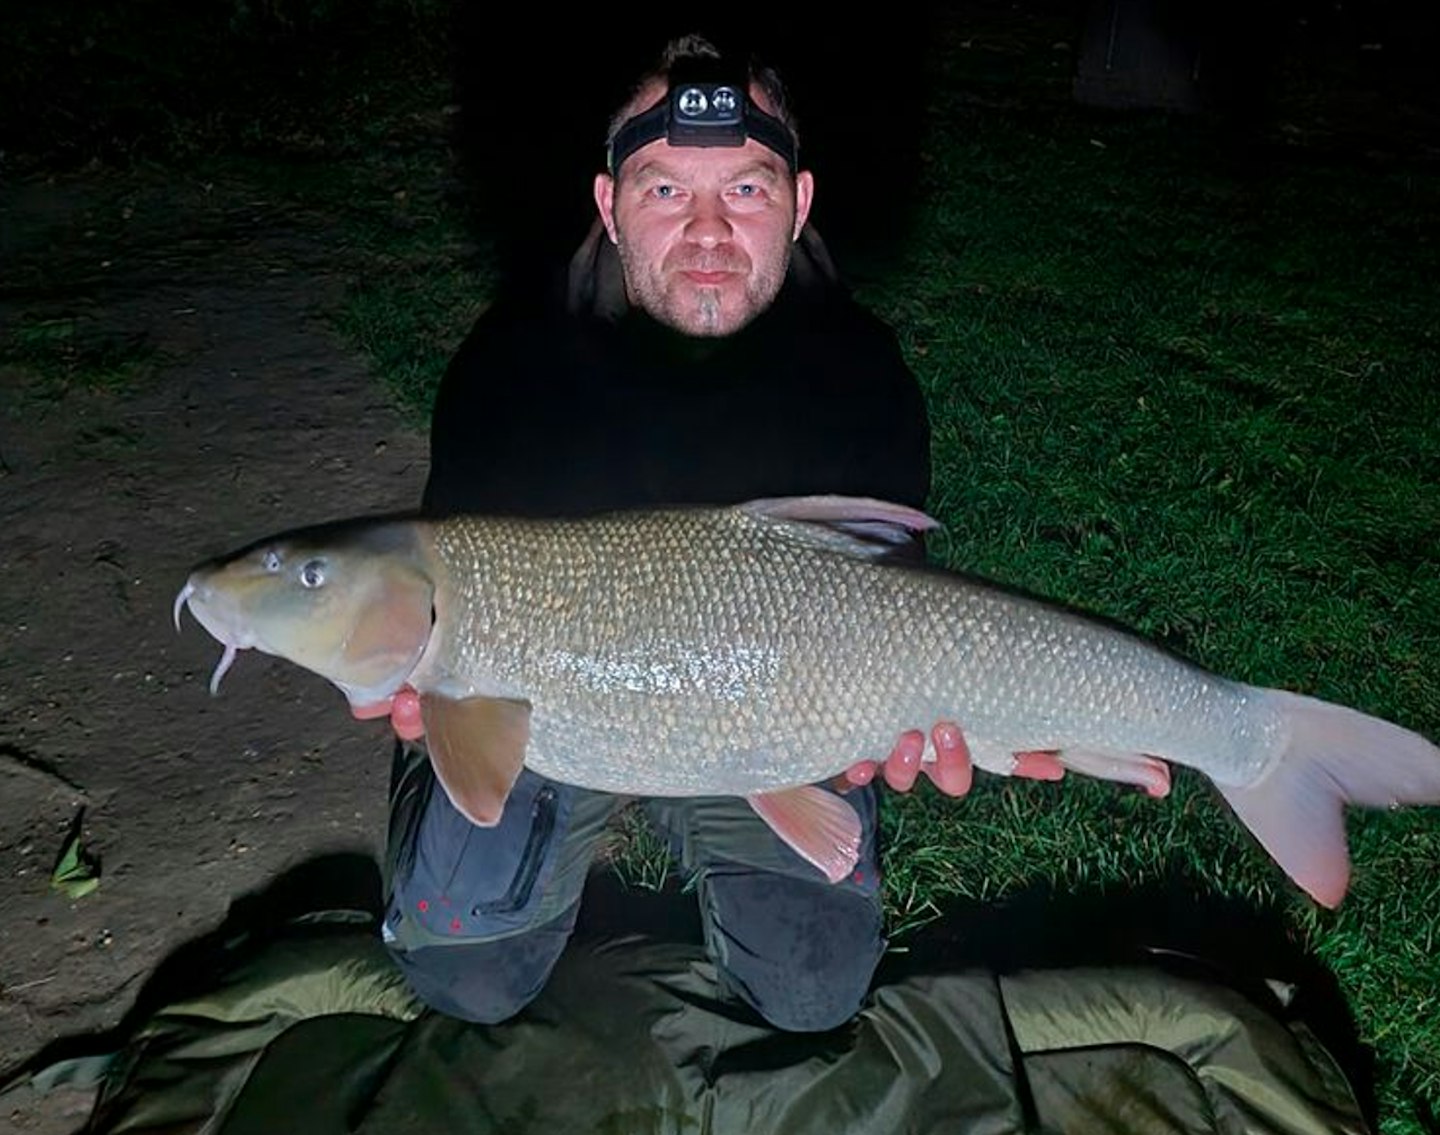 Marcin banked the 20lb 9oz barbel from the River Thames